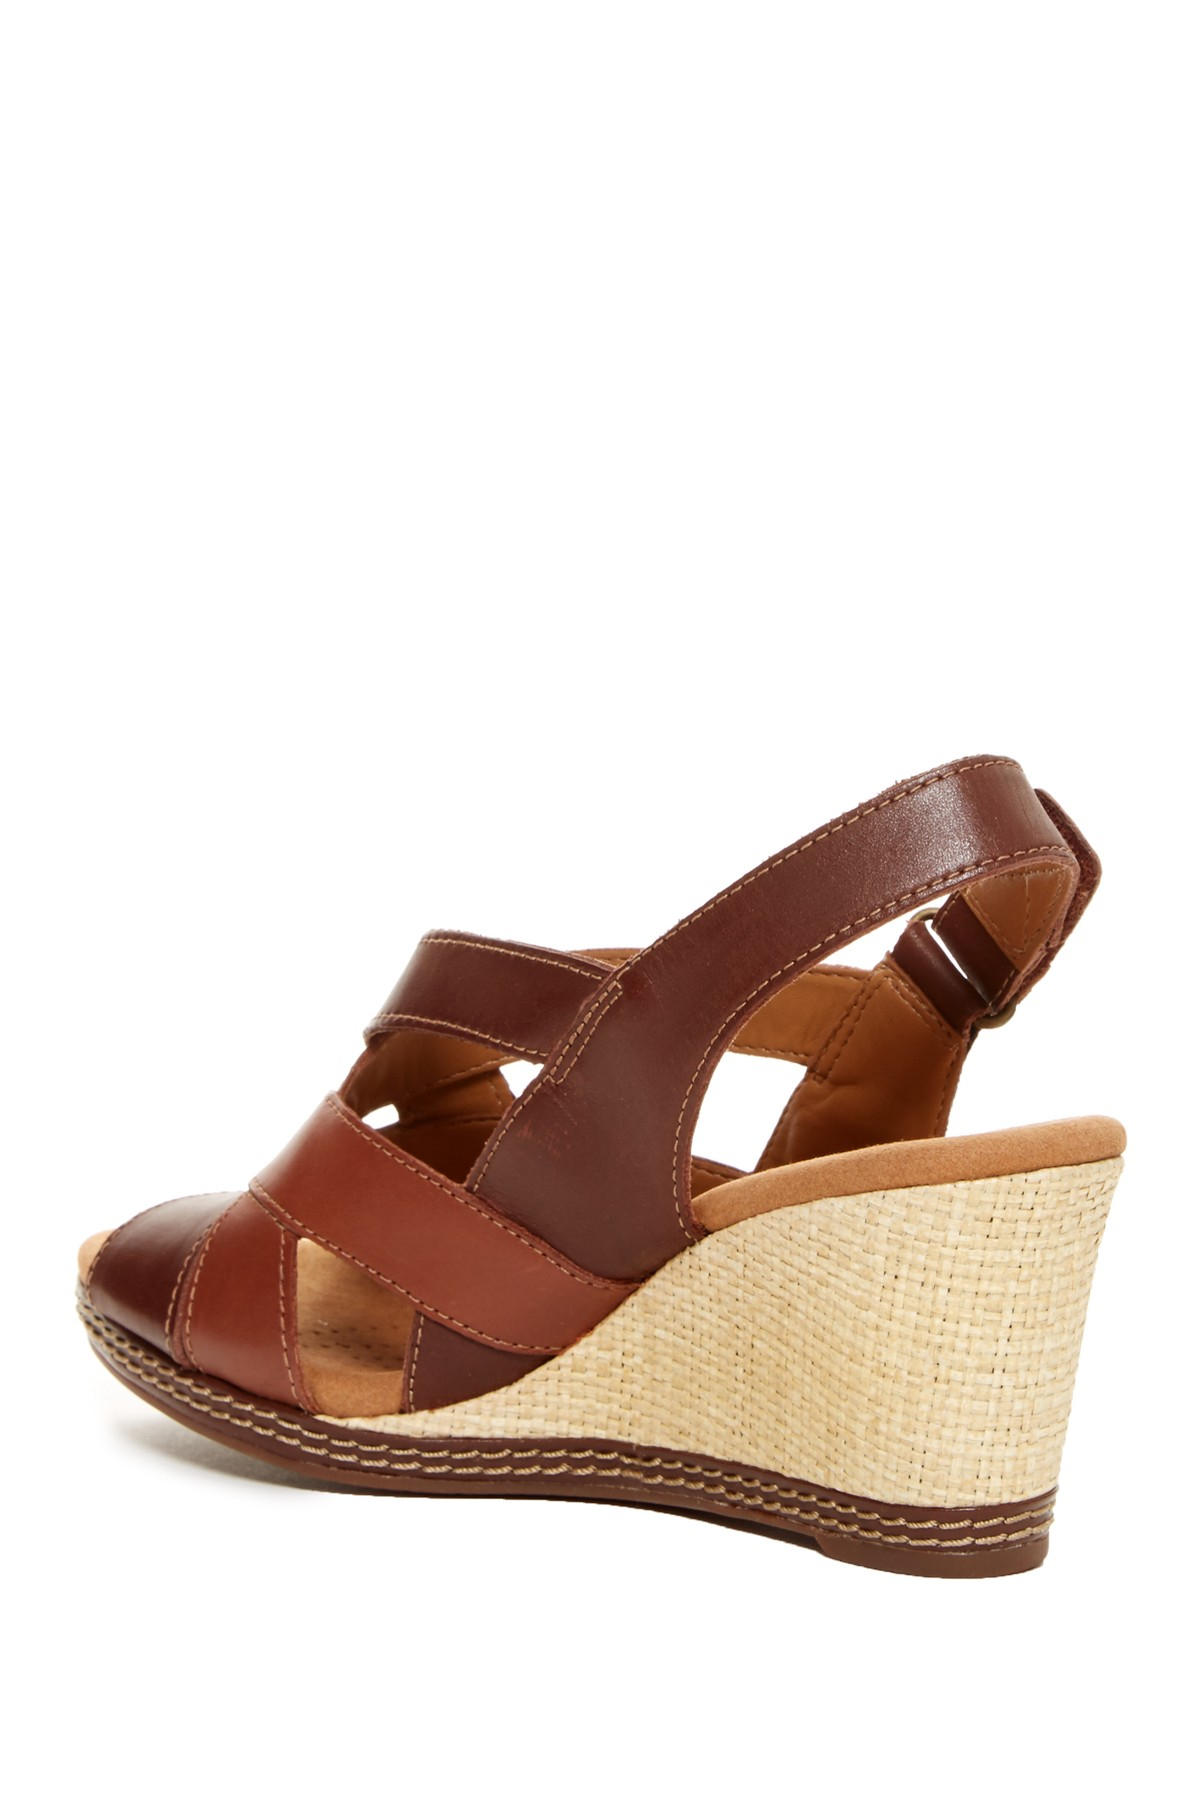 Lyst - Clarks Helio Coral Wedge Sandal - Wide Width Available in Brown